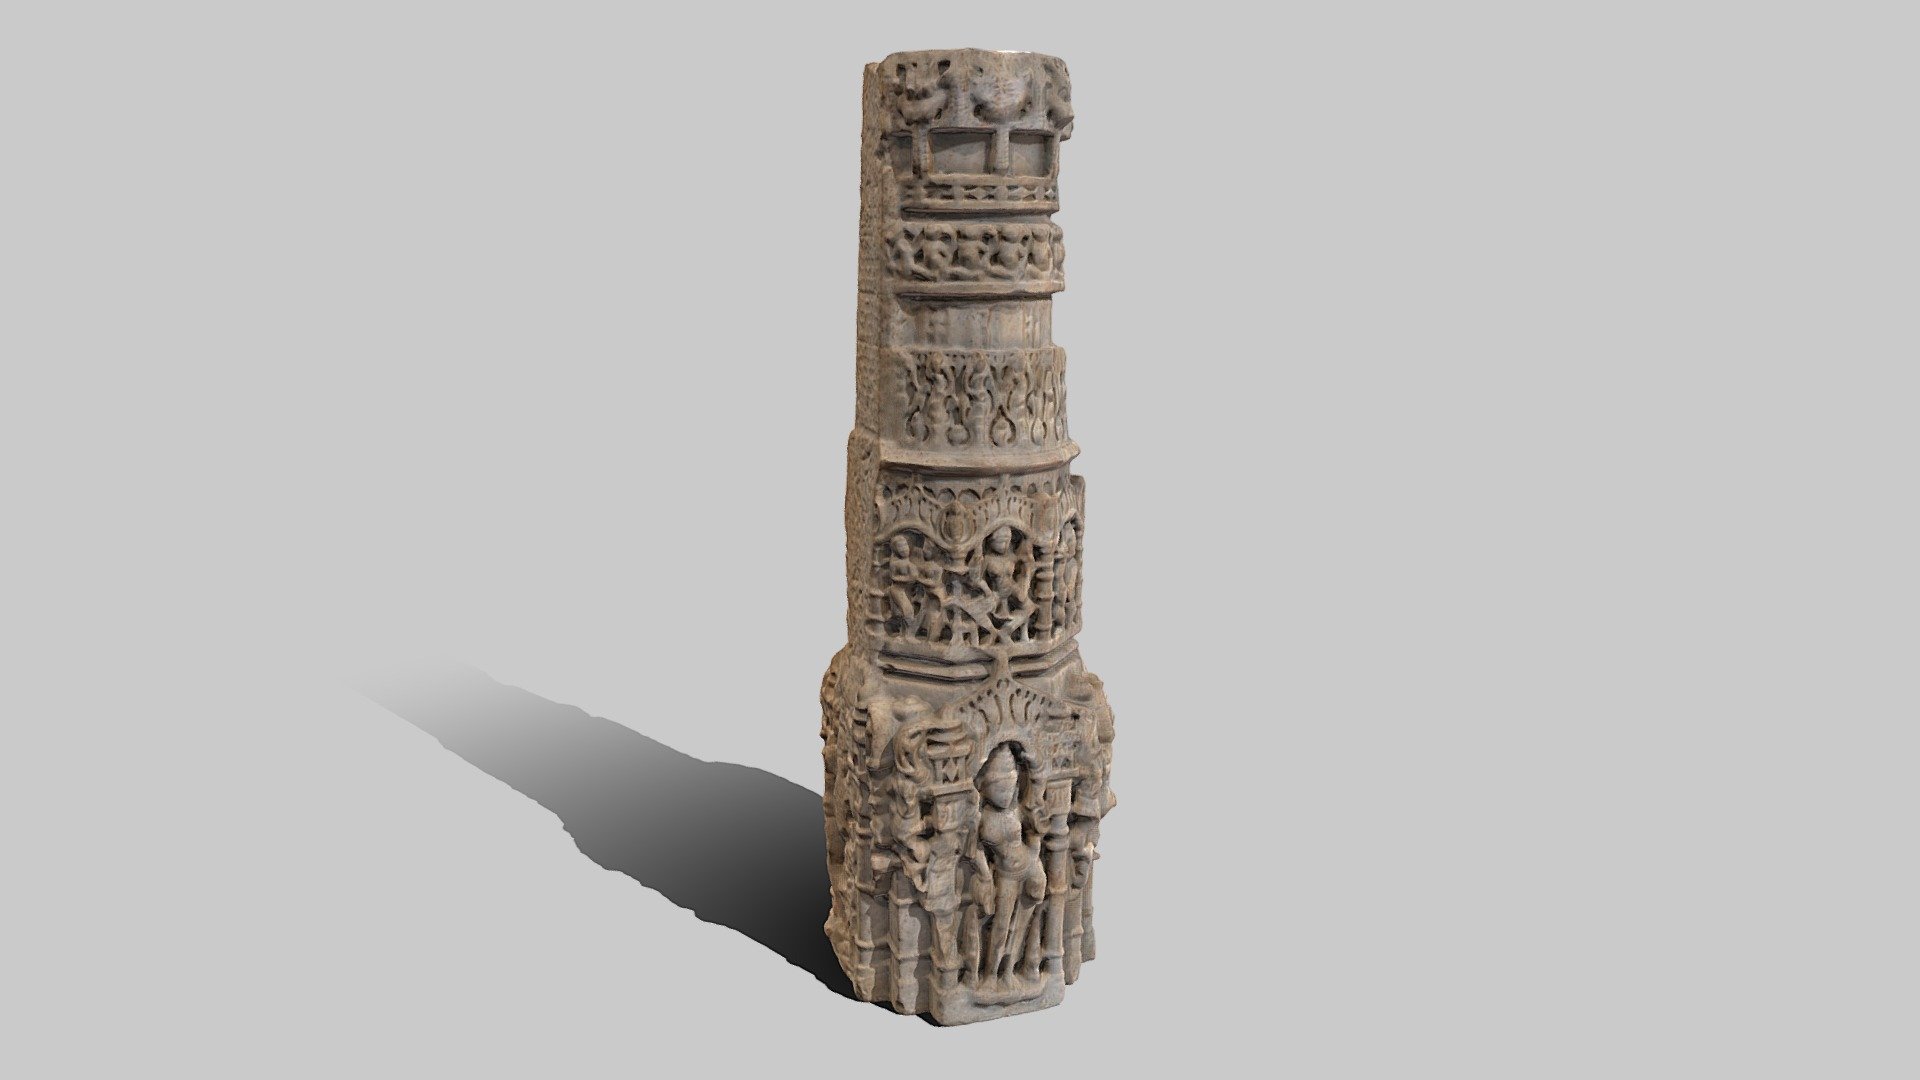 A marble pillar, perhaps from a Jain temple, India. Now located in the British Museum, London.

Date: 12th Century.

https://www.britishmuseum.org/collection/object/A_1994-1215-1

47 photos taken in May 2023 with a Sony a7R III and processed in Reality Capture. Lighting removed in Agisoft Delighter 3d model